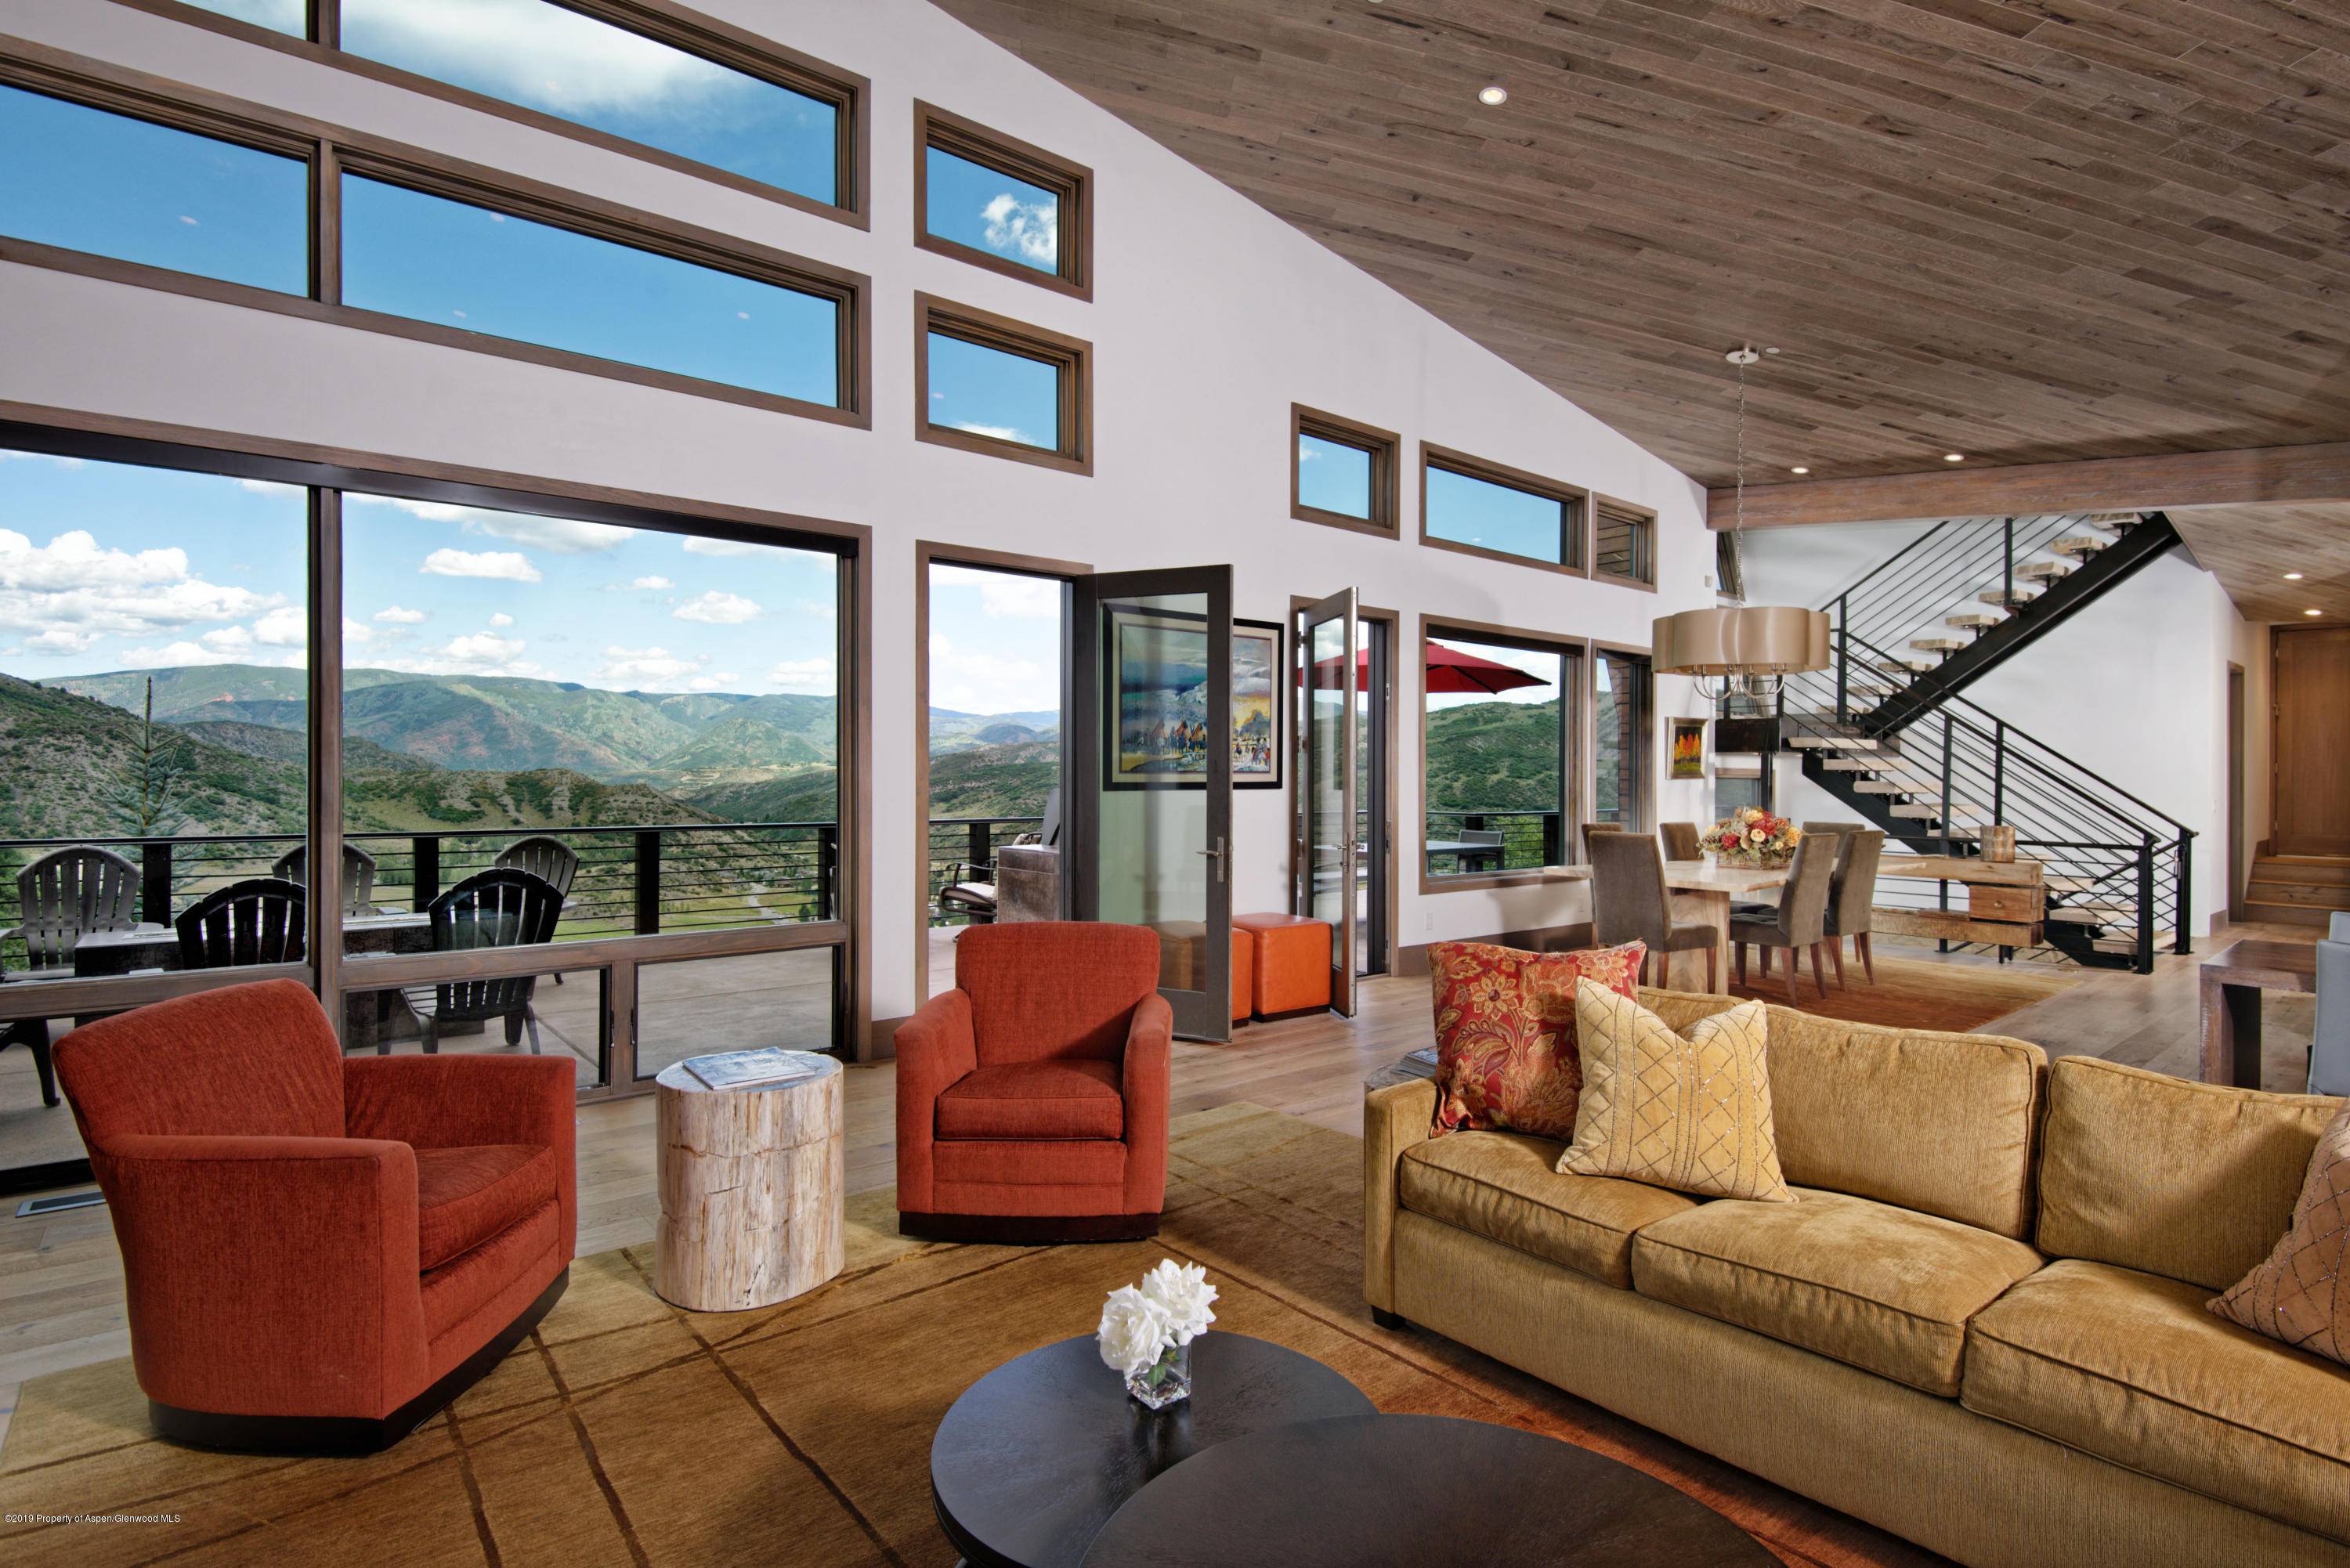 This stunning 5 bedroom mountain contemporary home on Oak Ridge Road features sweeping views framed by floor to ceiling windows, an open floor plan, gorgeous finishes and furnishings, two living ...